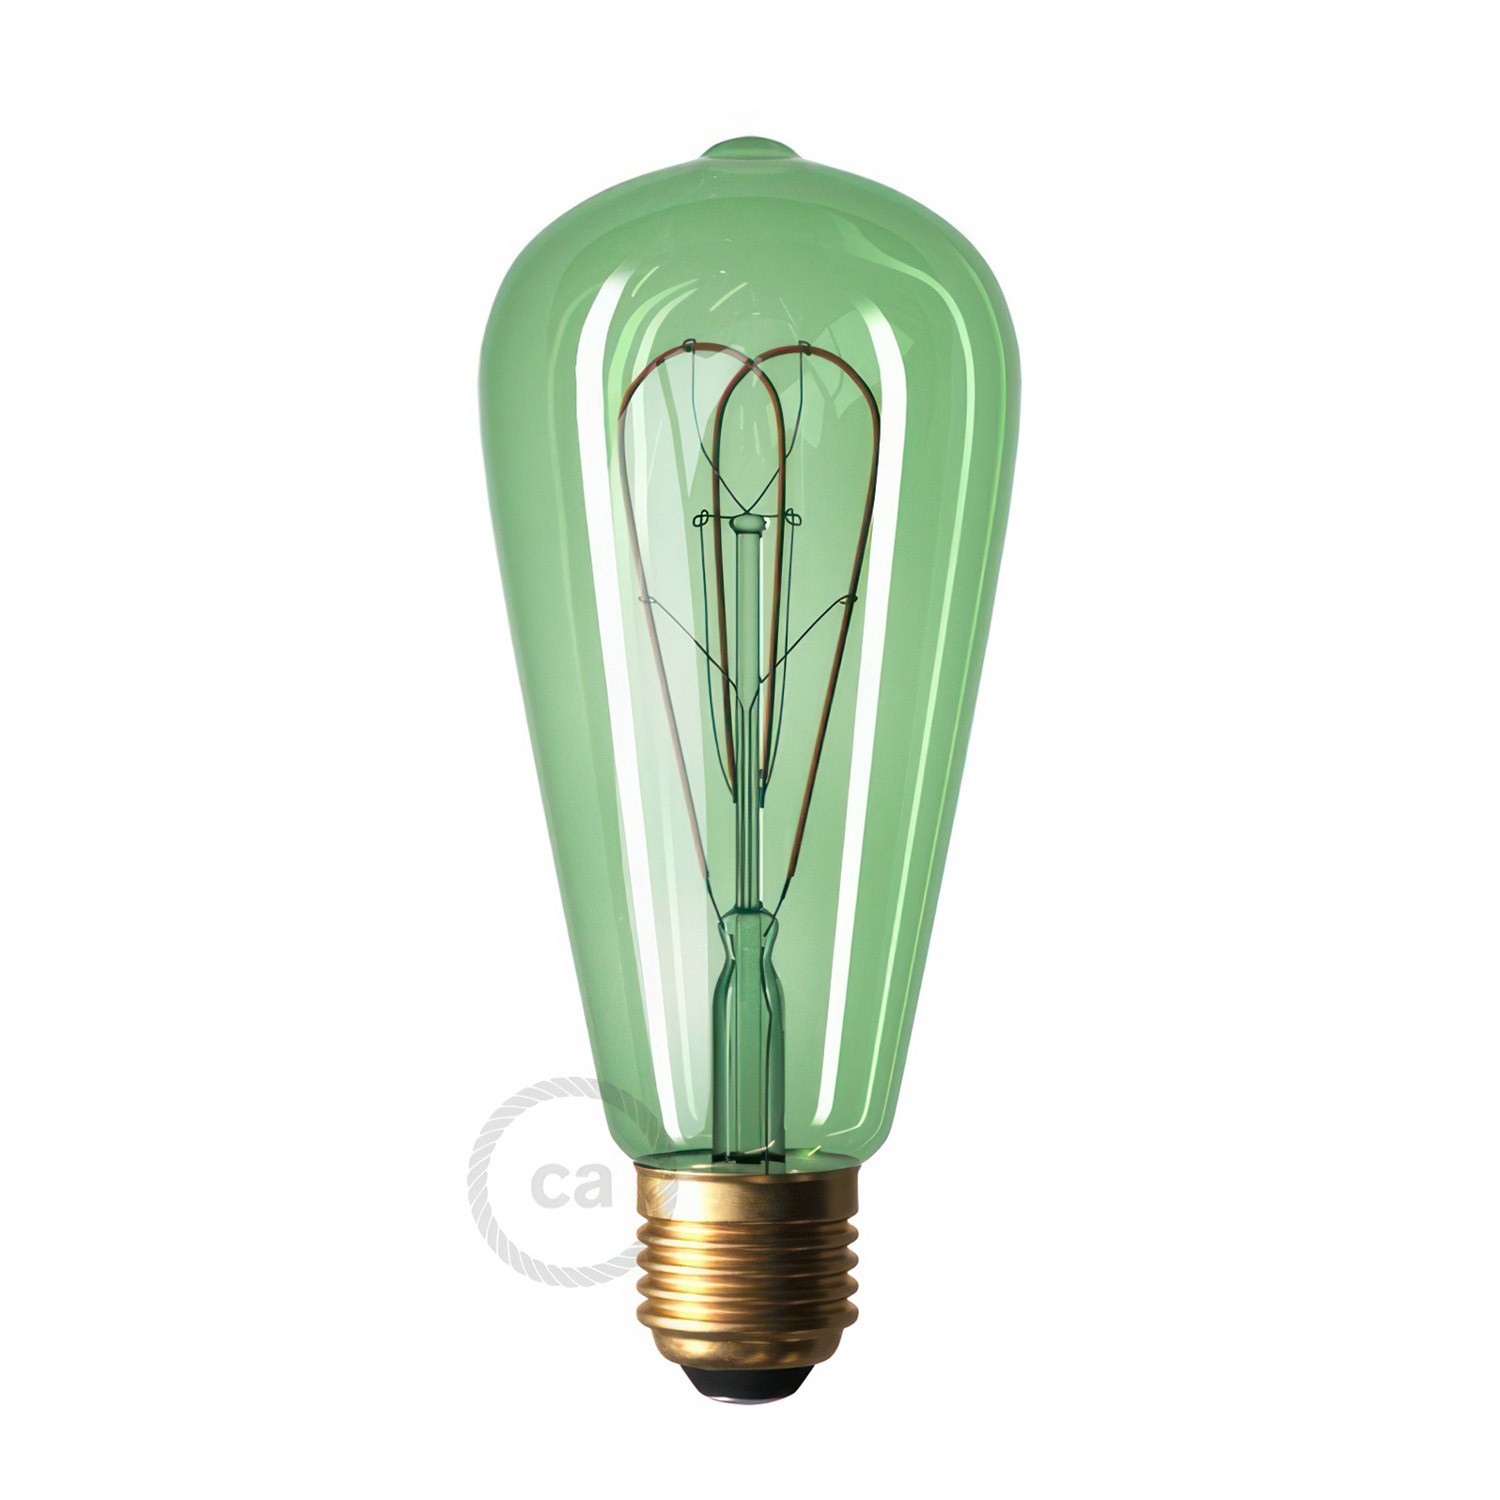 Flex 90 ceiling lamp flexible provides diffused light with LED ST64 light bulb